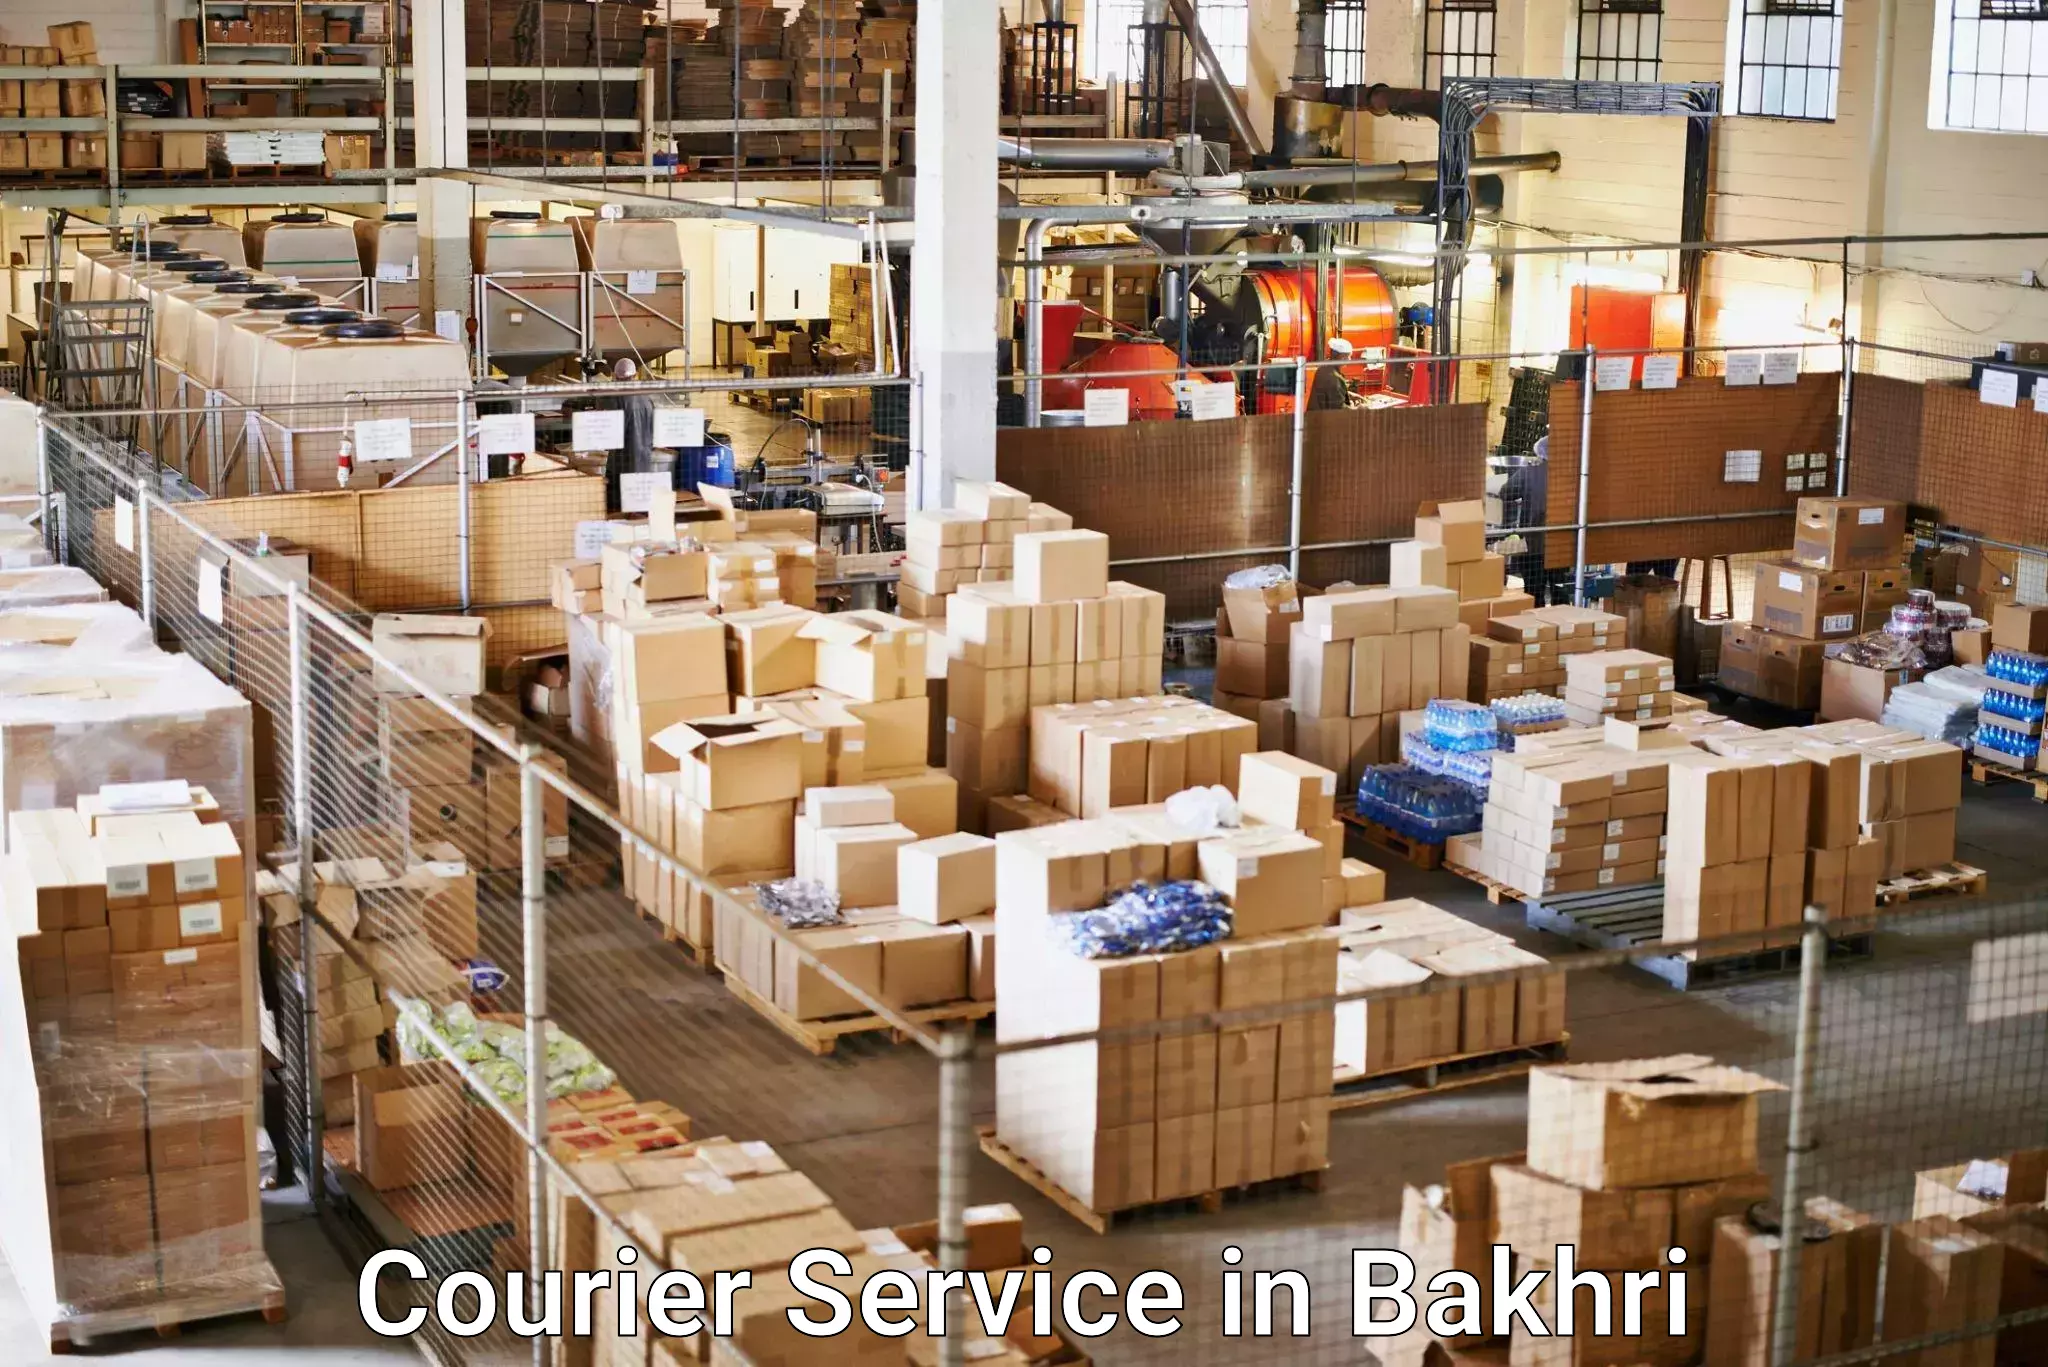 Customer-oriented courier services in Bakhri